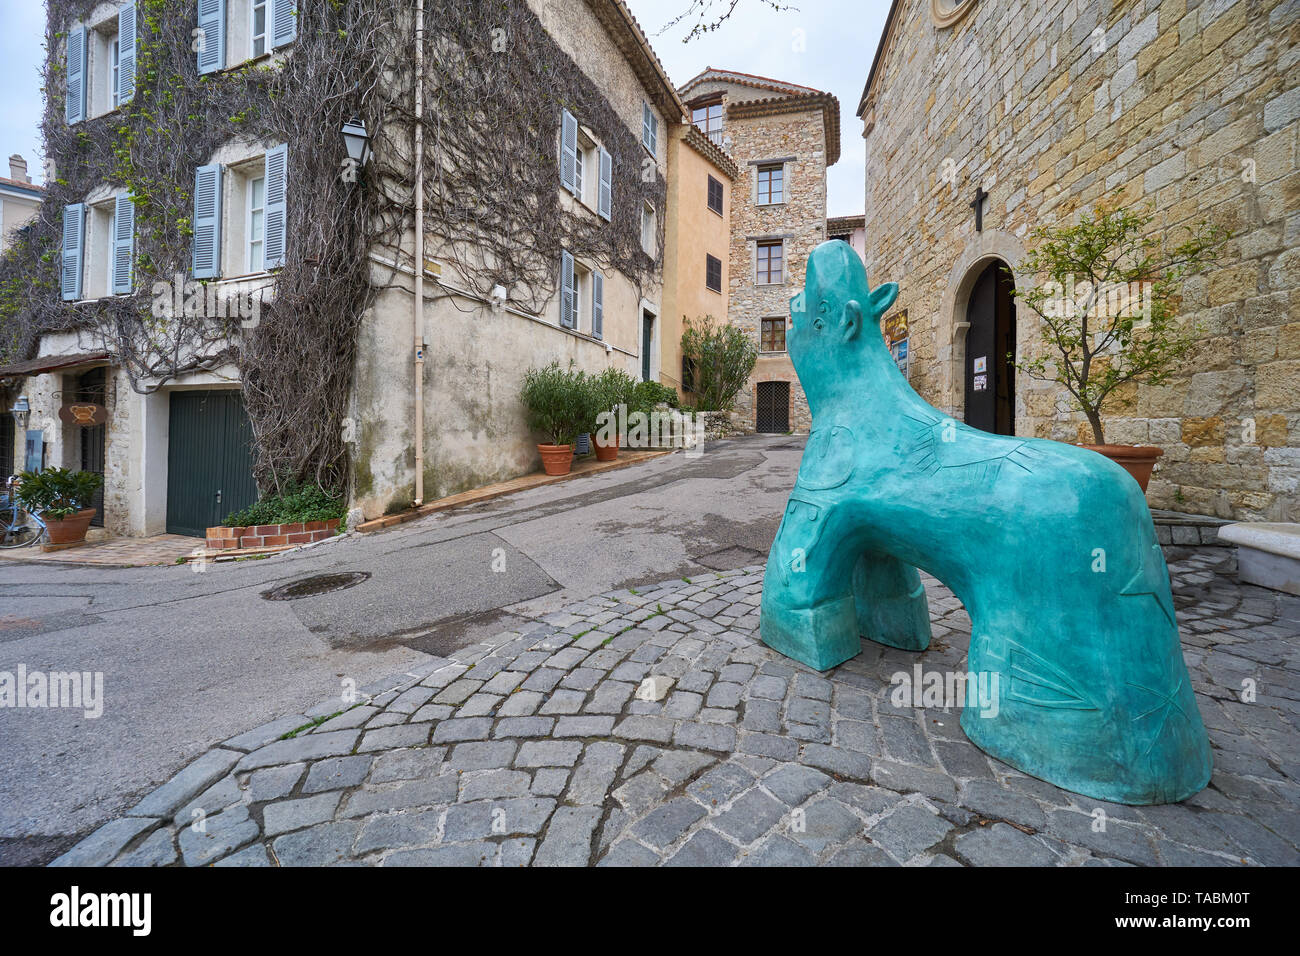 Mougins, France - April 04, 2019: Mougins is a commune in southeastern France that is a great place of tourist attractions. There is a turquoise sculp Stock Photo